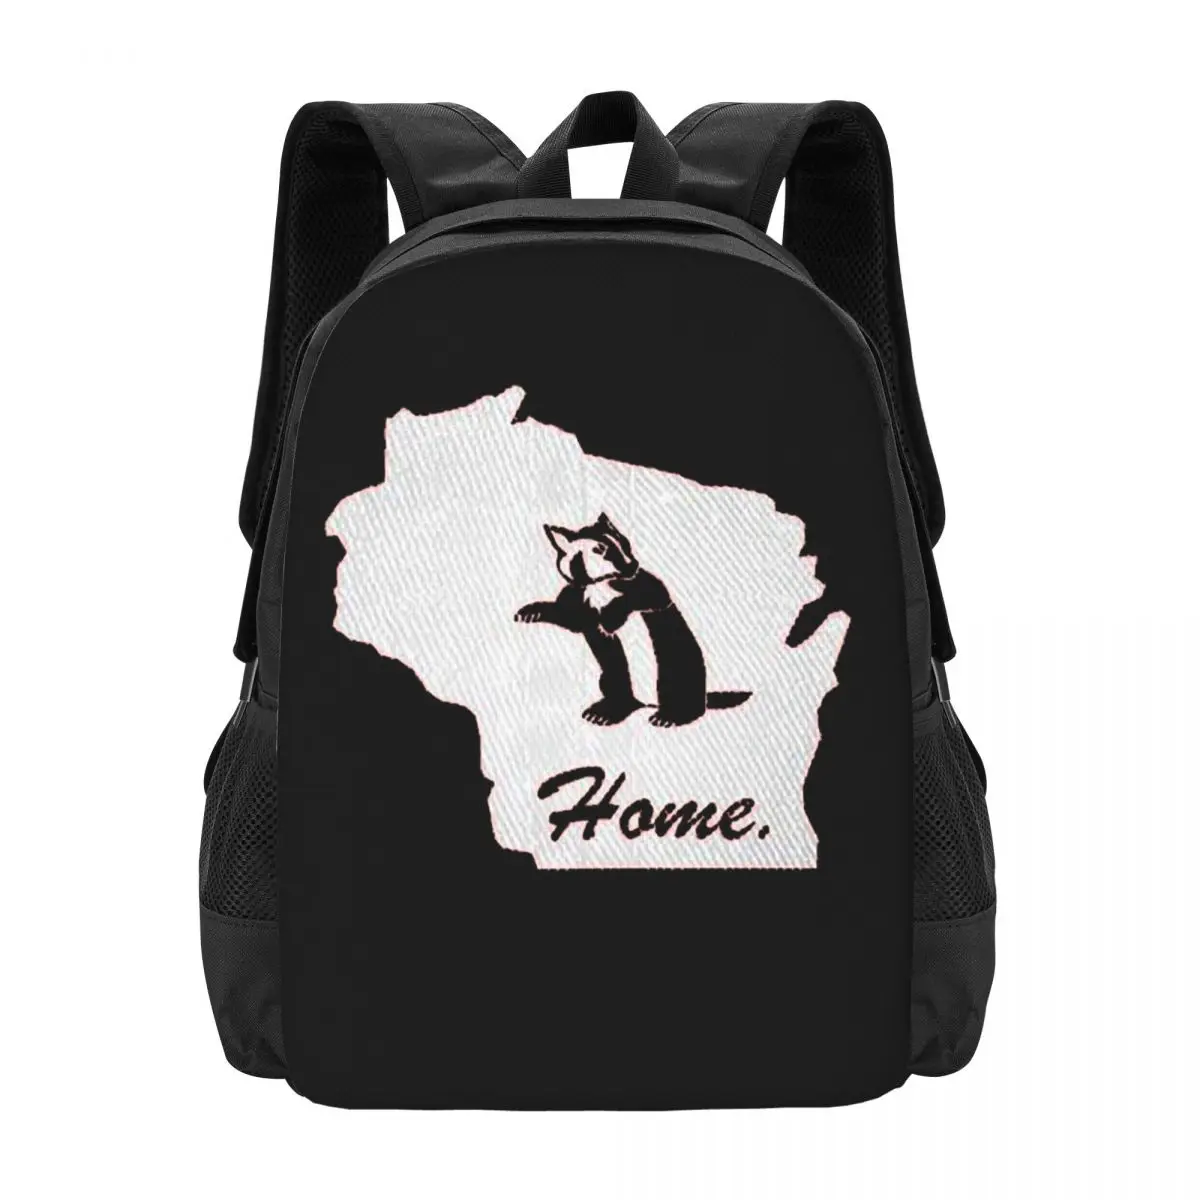 

Wisconsin Badger Home State Simple Stylish Student Schoolbag Waterproof Large Capacity Casual Backpack Travel Laptop Rucksack